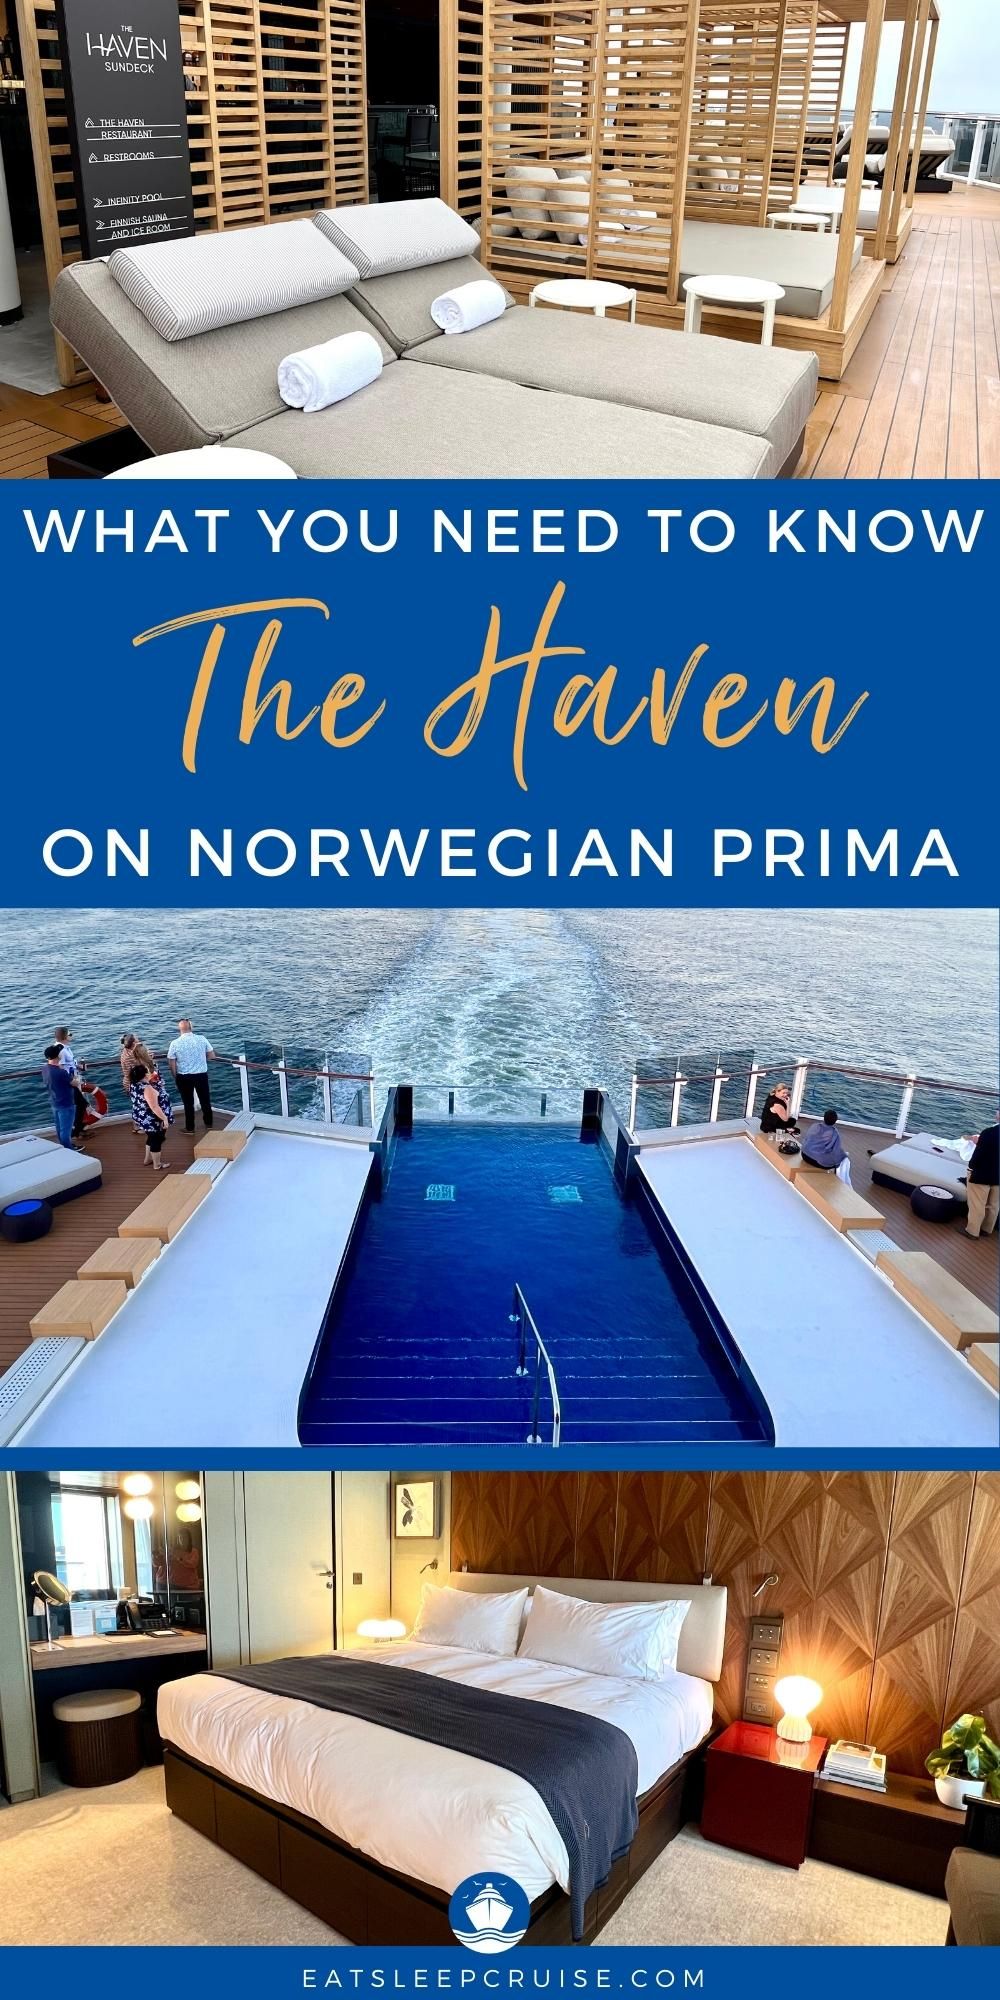 Everything You Need to Know About the Haven on Norwegian Prima